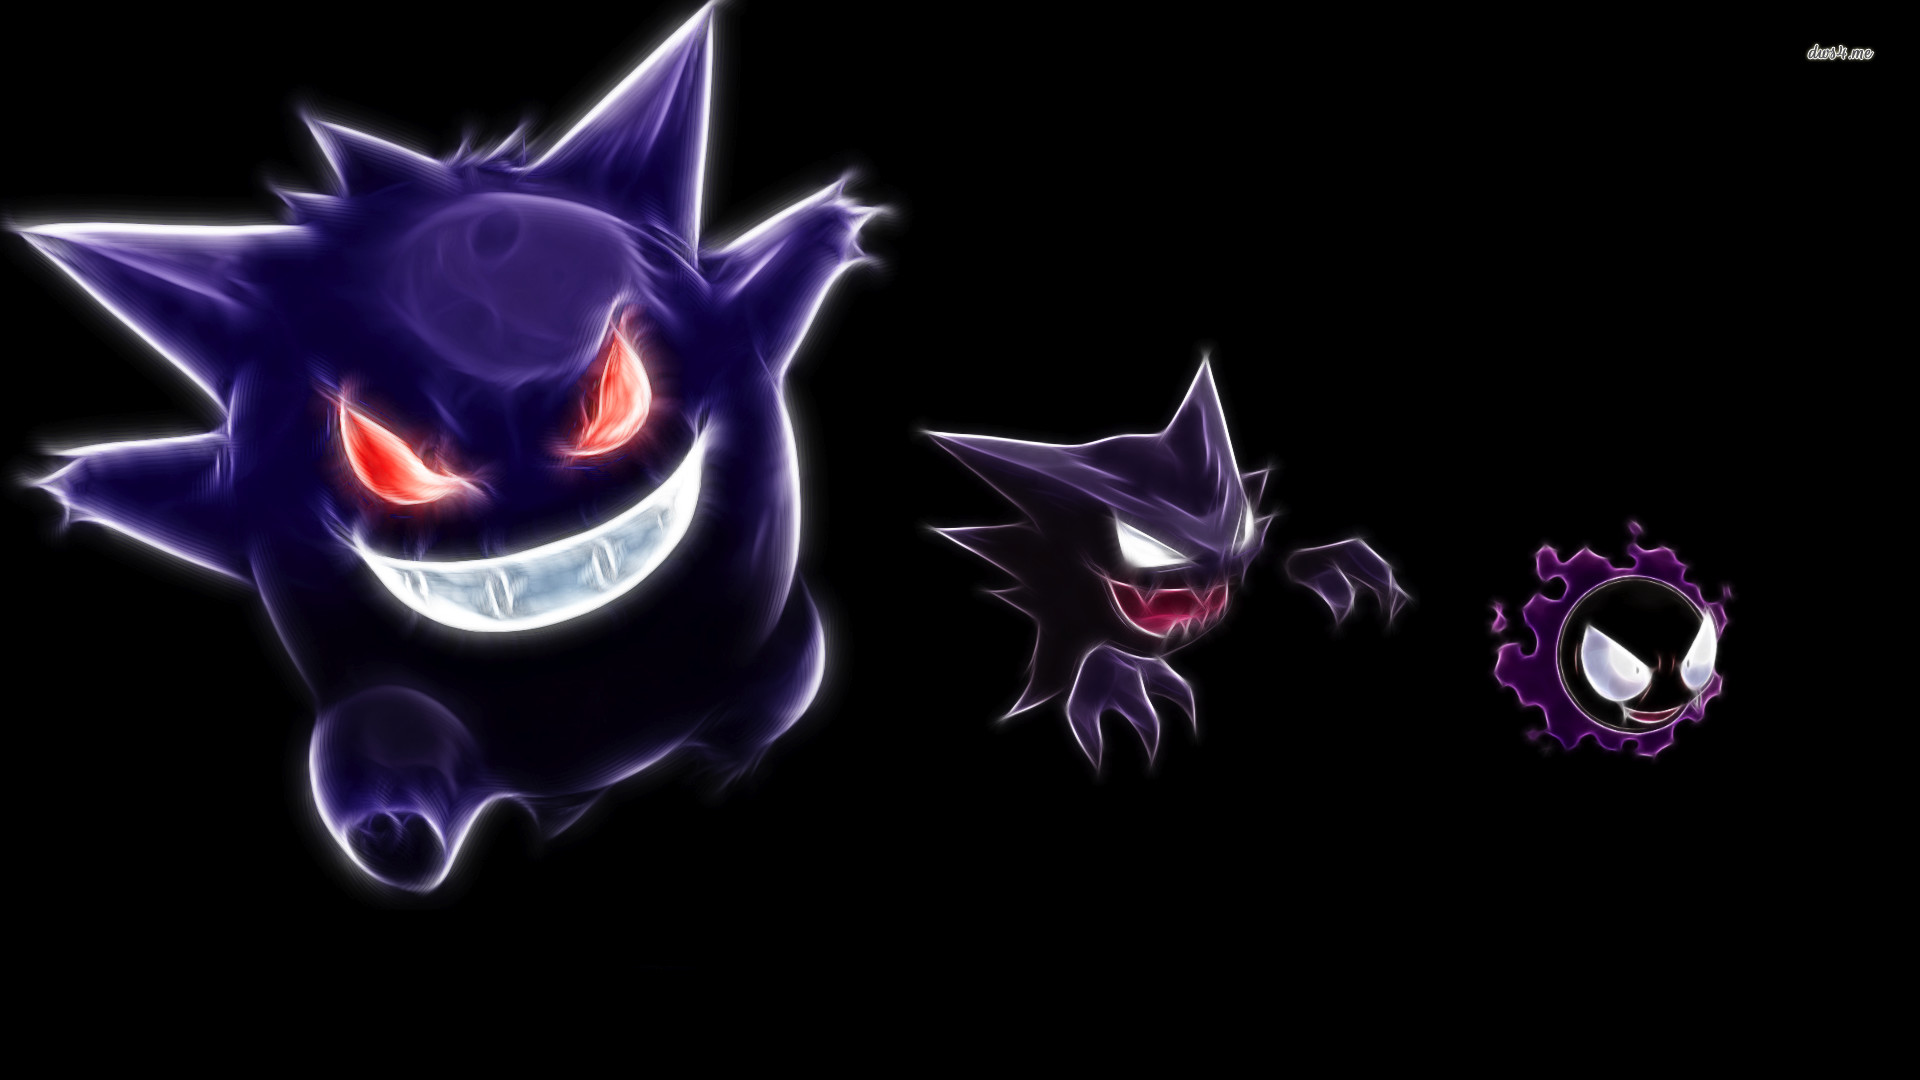 Gengar, Haunter and Gastly in Pokemon wallpaper – Game wallpapers